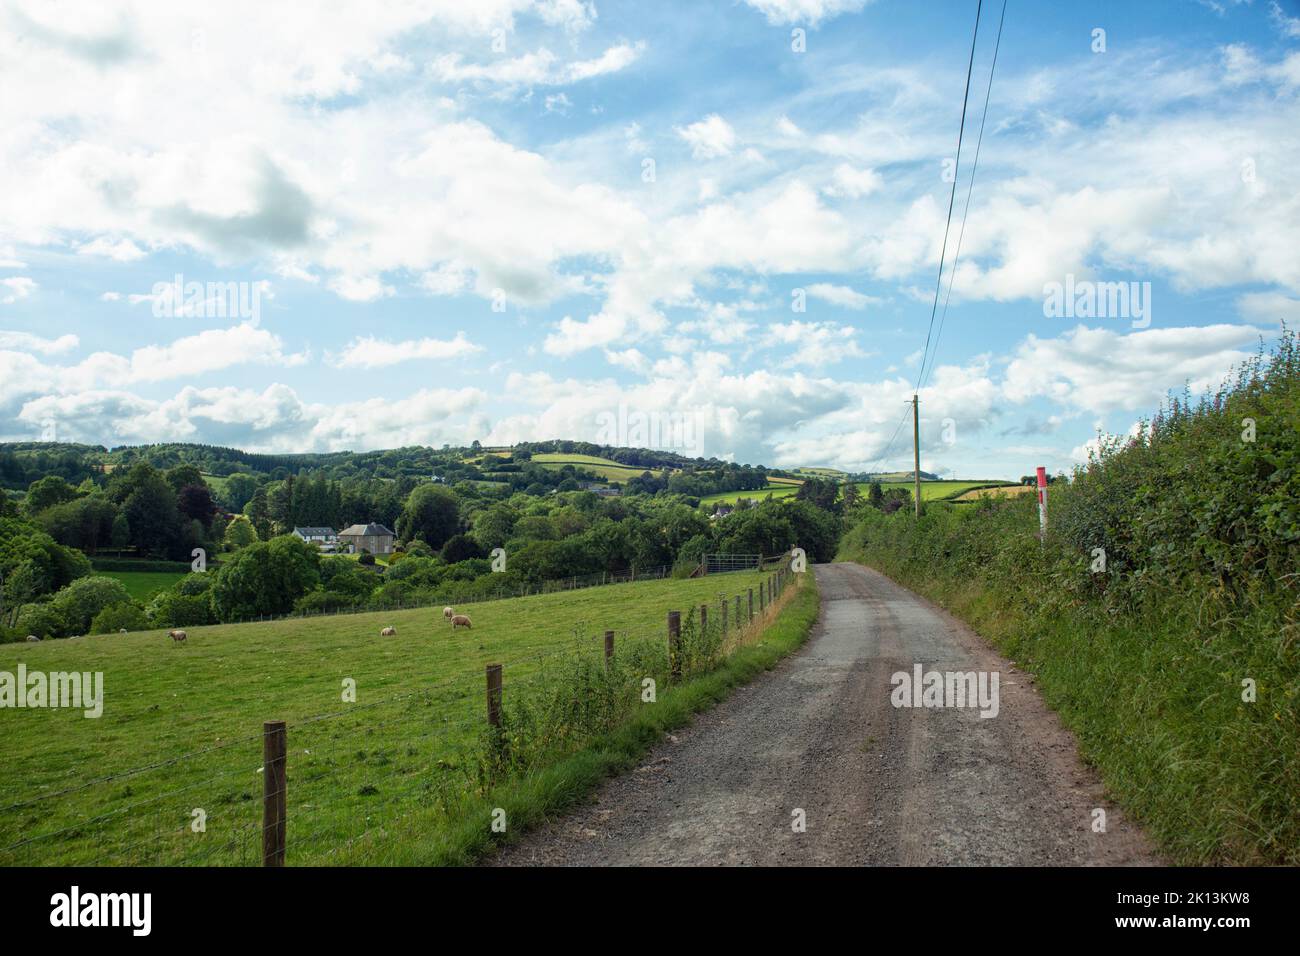 The Welsh Brecon Beacons landscape with sheep Stock Photo